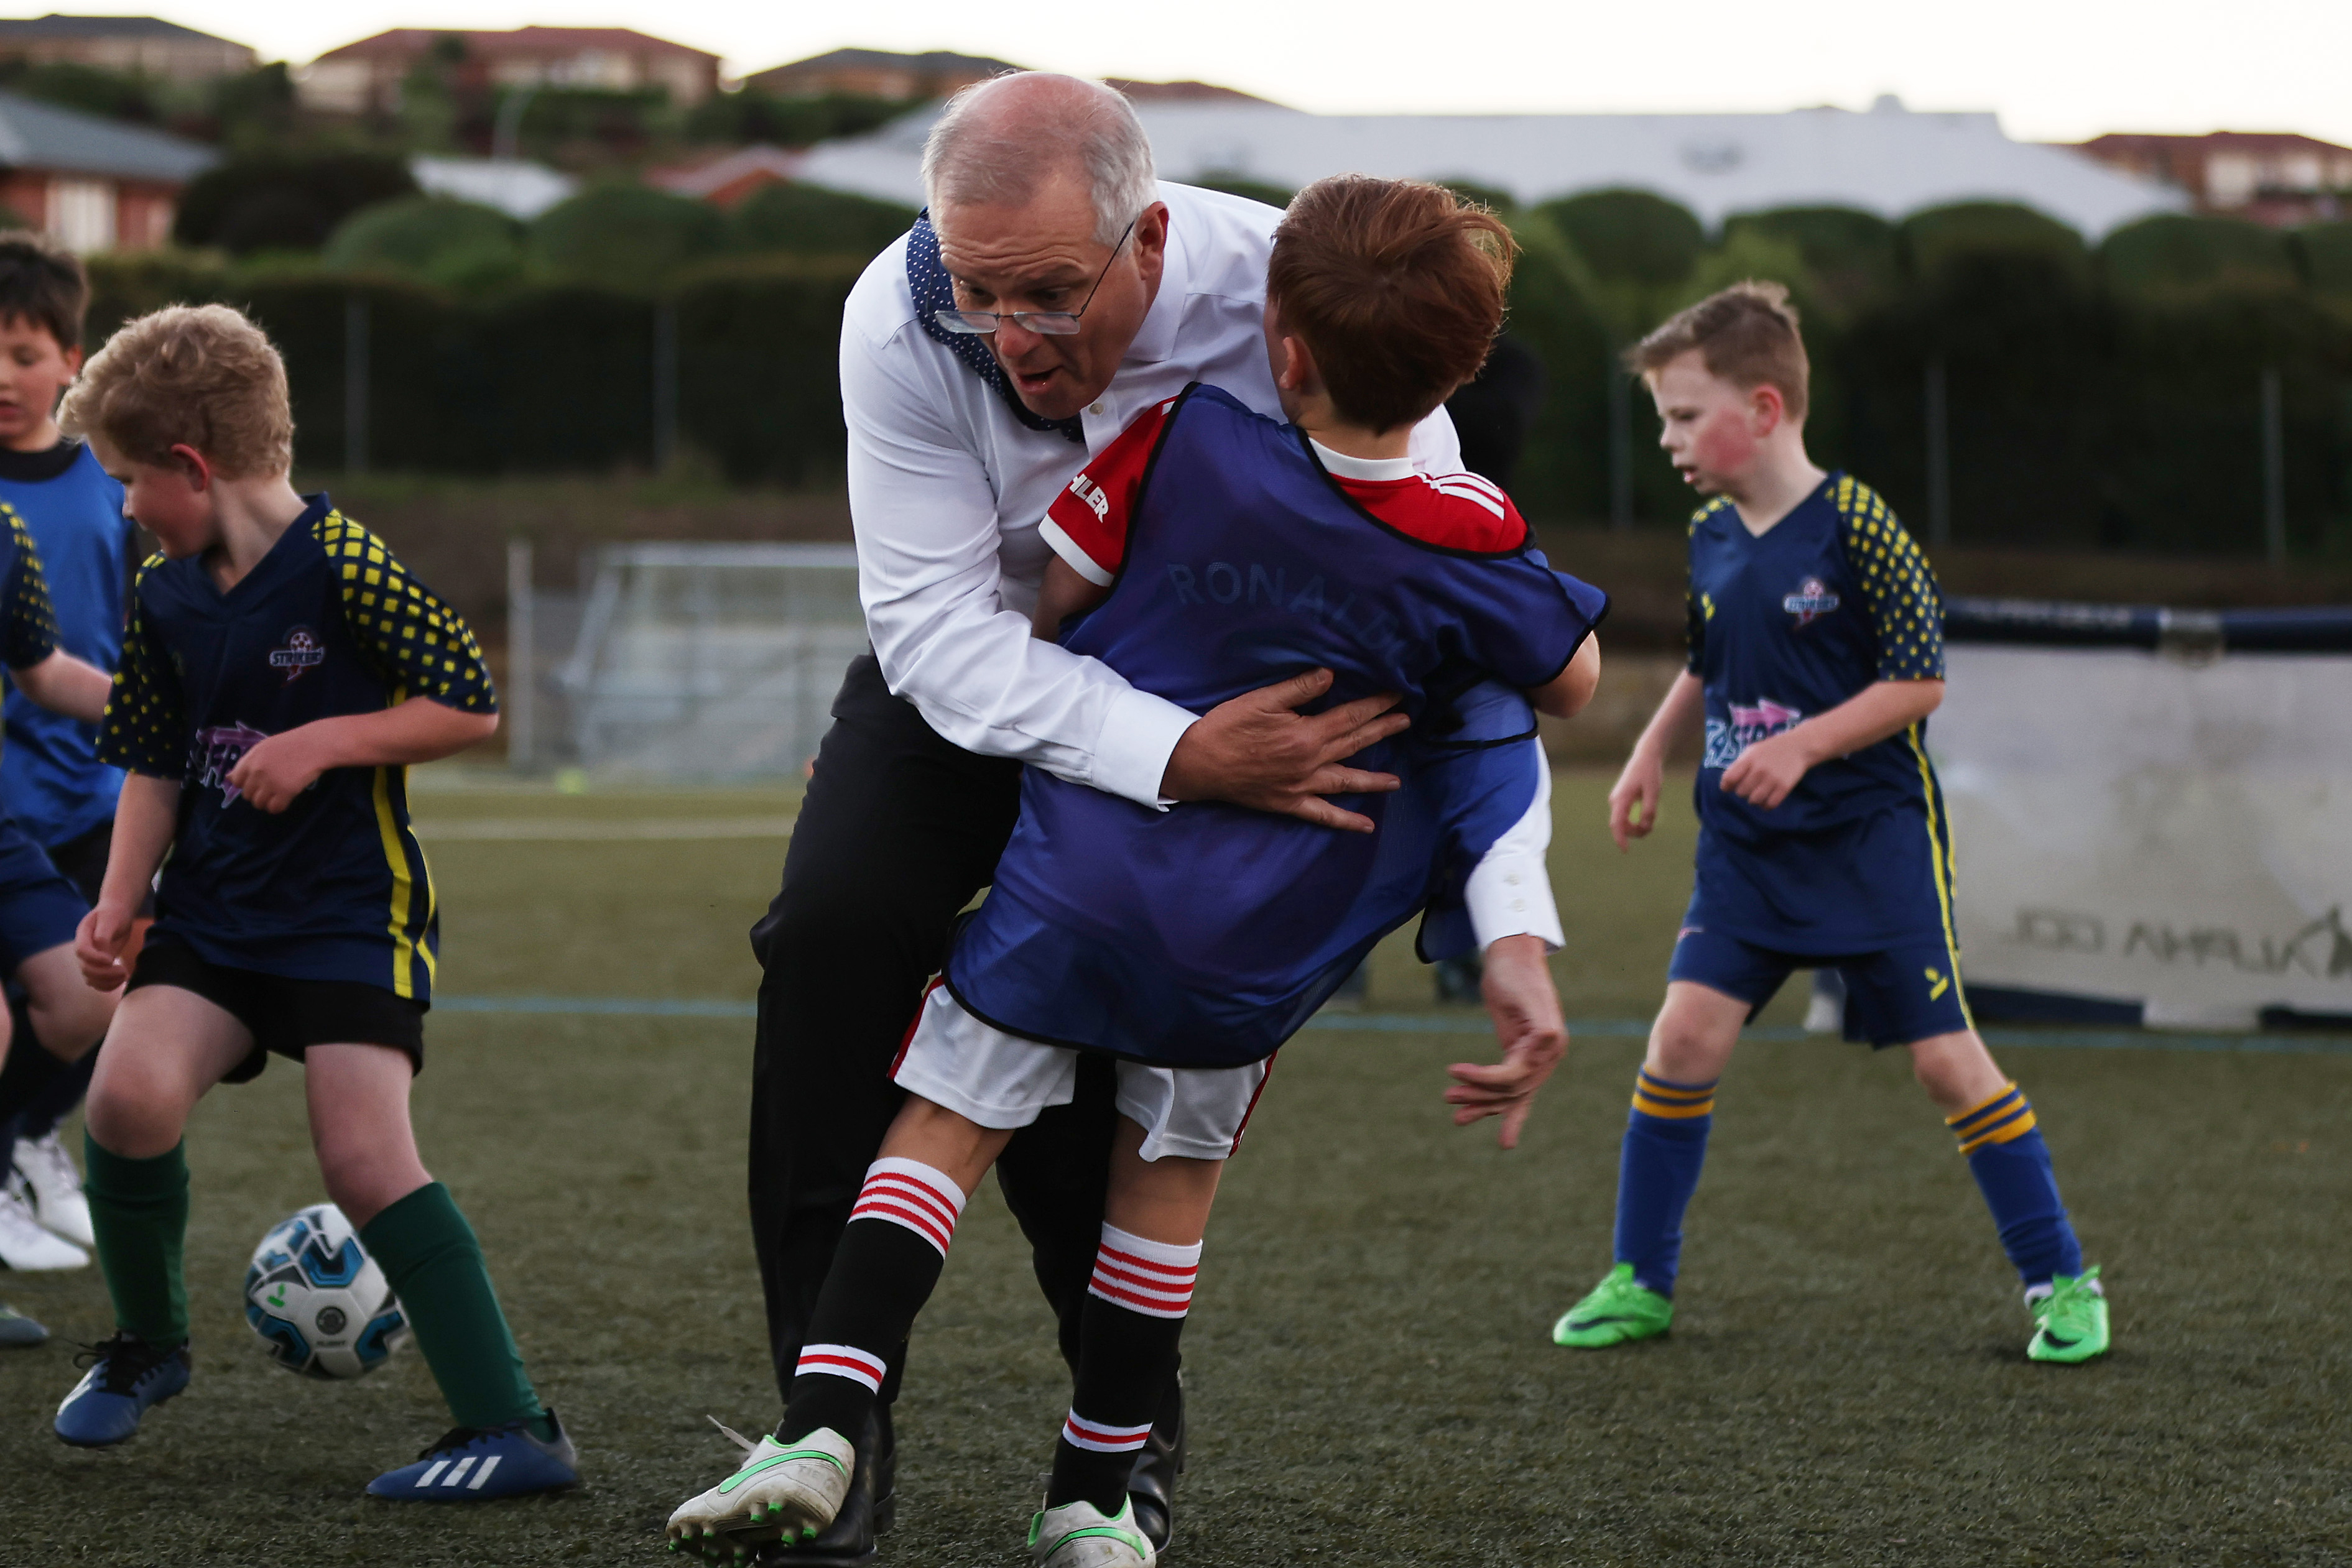 Prime Minister topples child while playing soccer on campaign trail